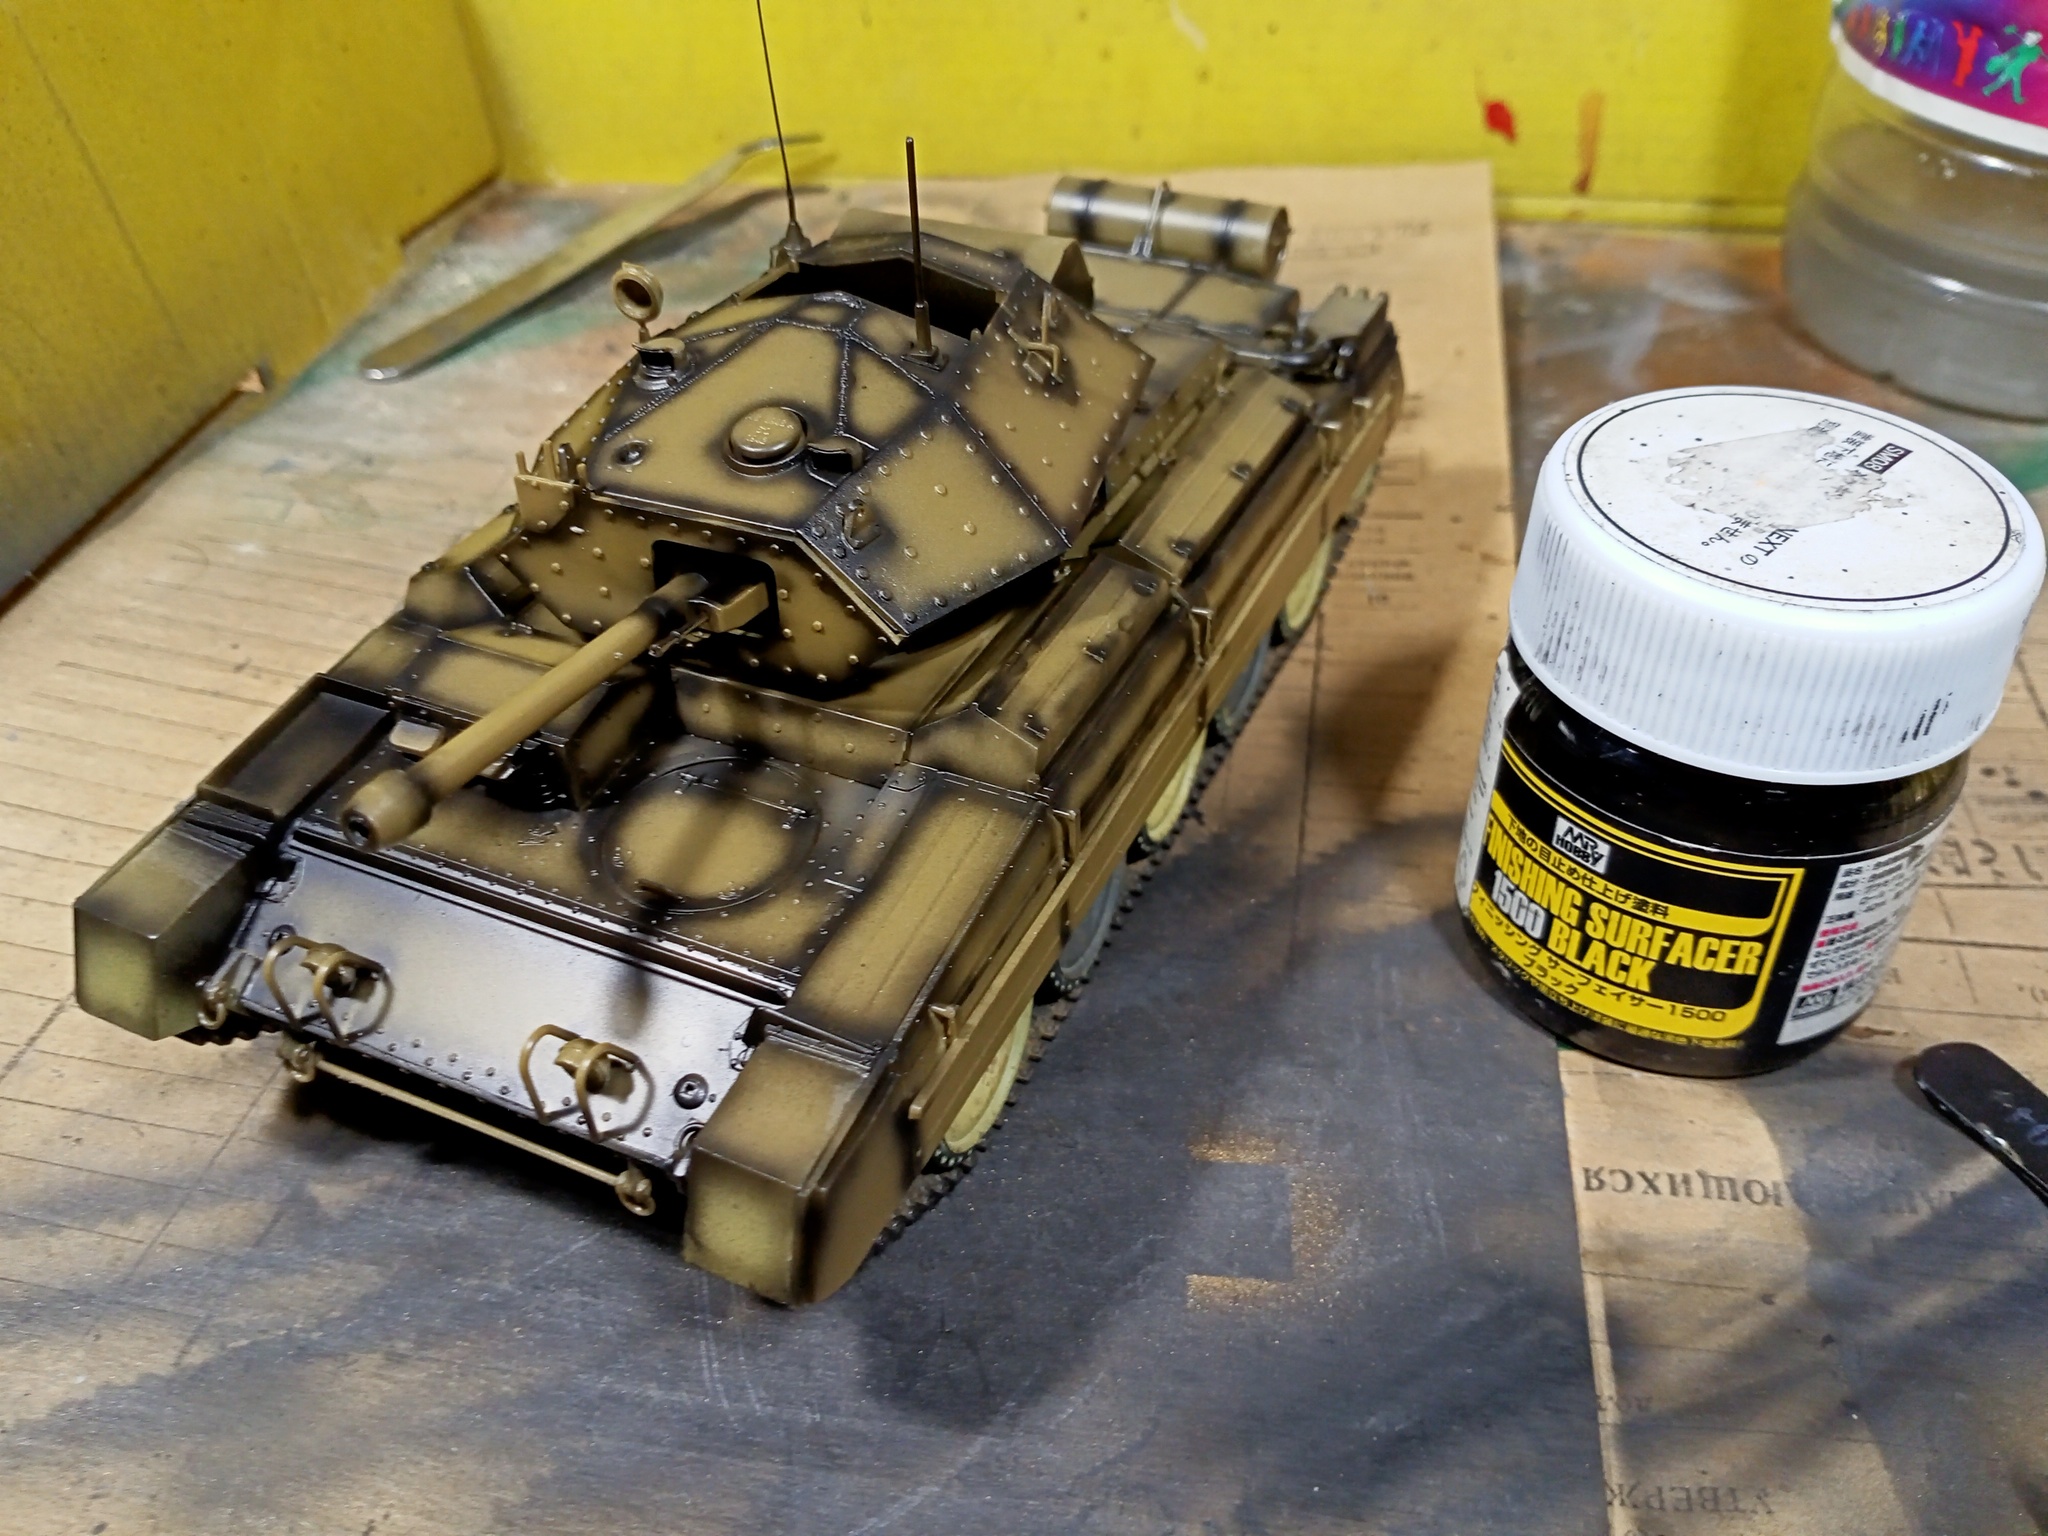 Crusader III with mini diorama (1/35 Italeri). - My, Modeling, Stand modeling, Prefabricated model, Assembly, Hobby, Diorama, Miniature, Painting, , With your own hands, Needlework with process, Airbrushing, Tanks, World of tanks, Desert, Longpost